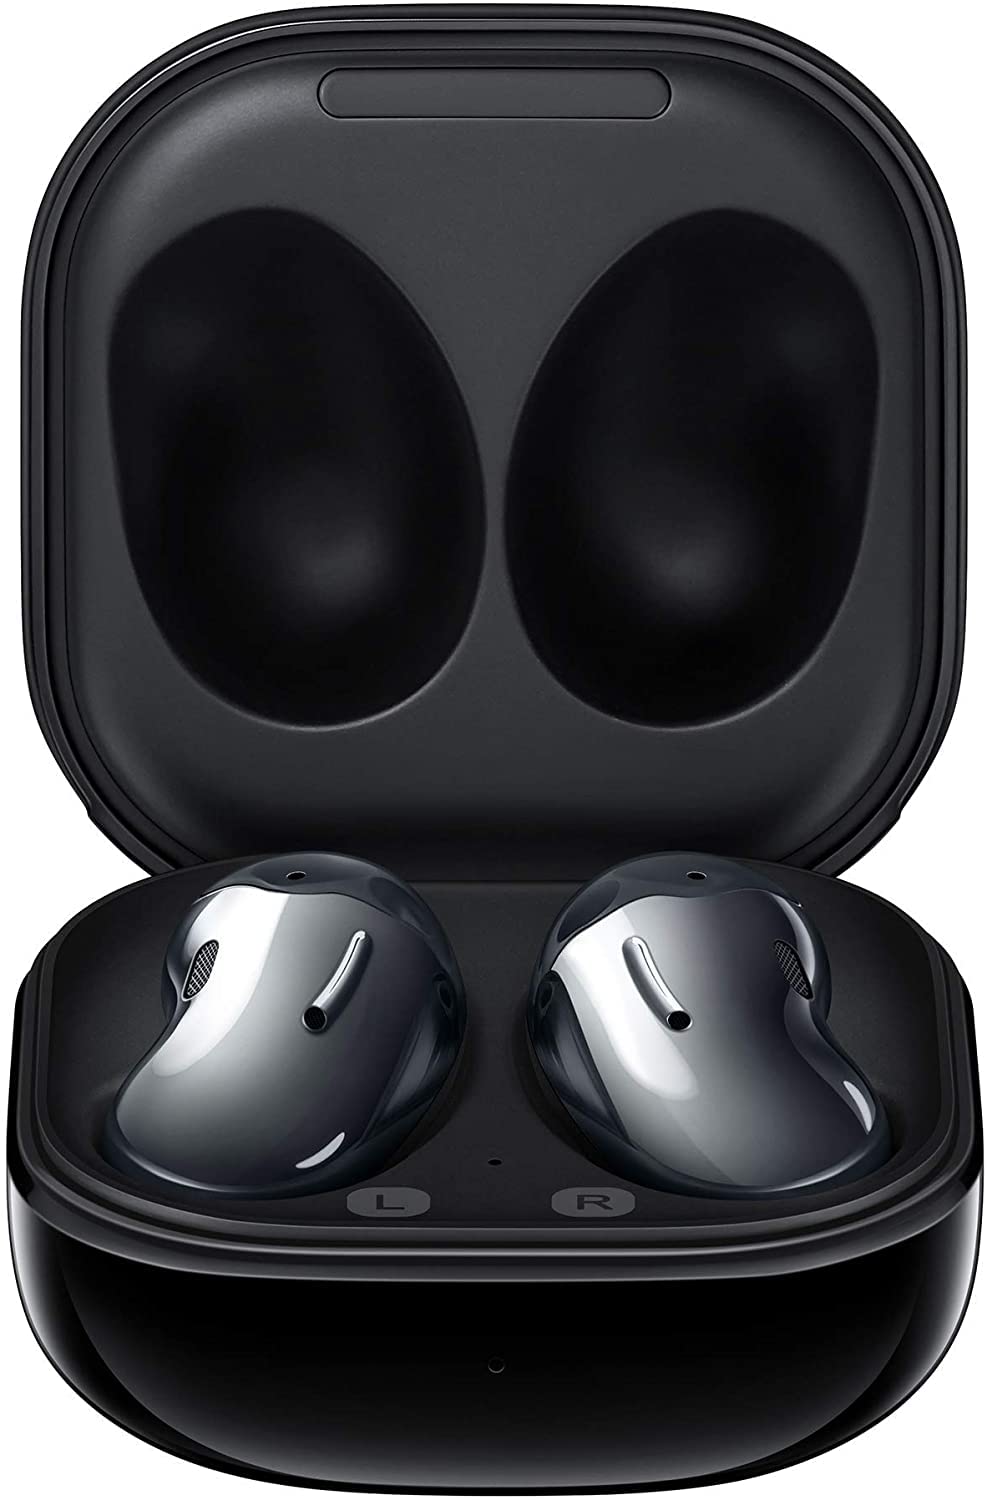 Samsung Galaxy Buds Live True Wireless Earbuds US Version Active Noise Cancelling Wireless Charging Case Included, Mystic Black